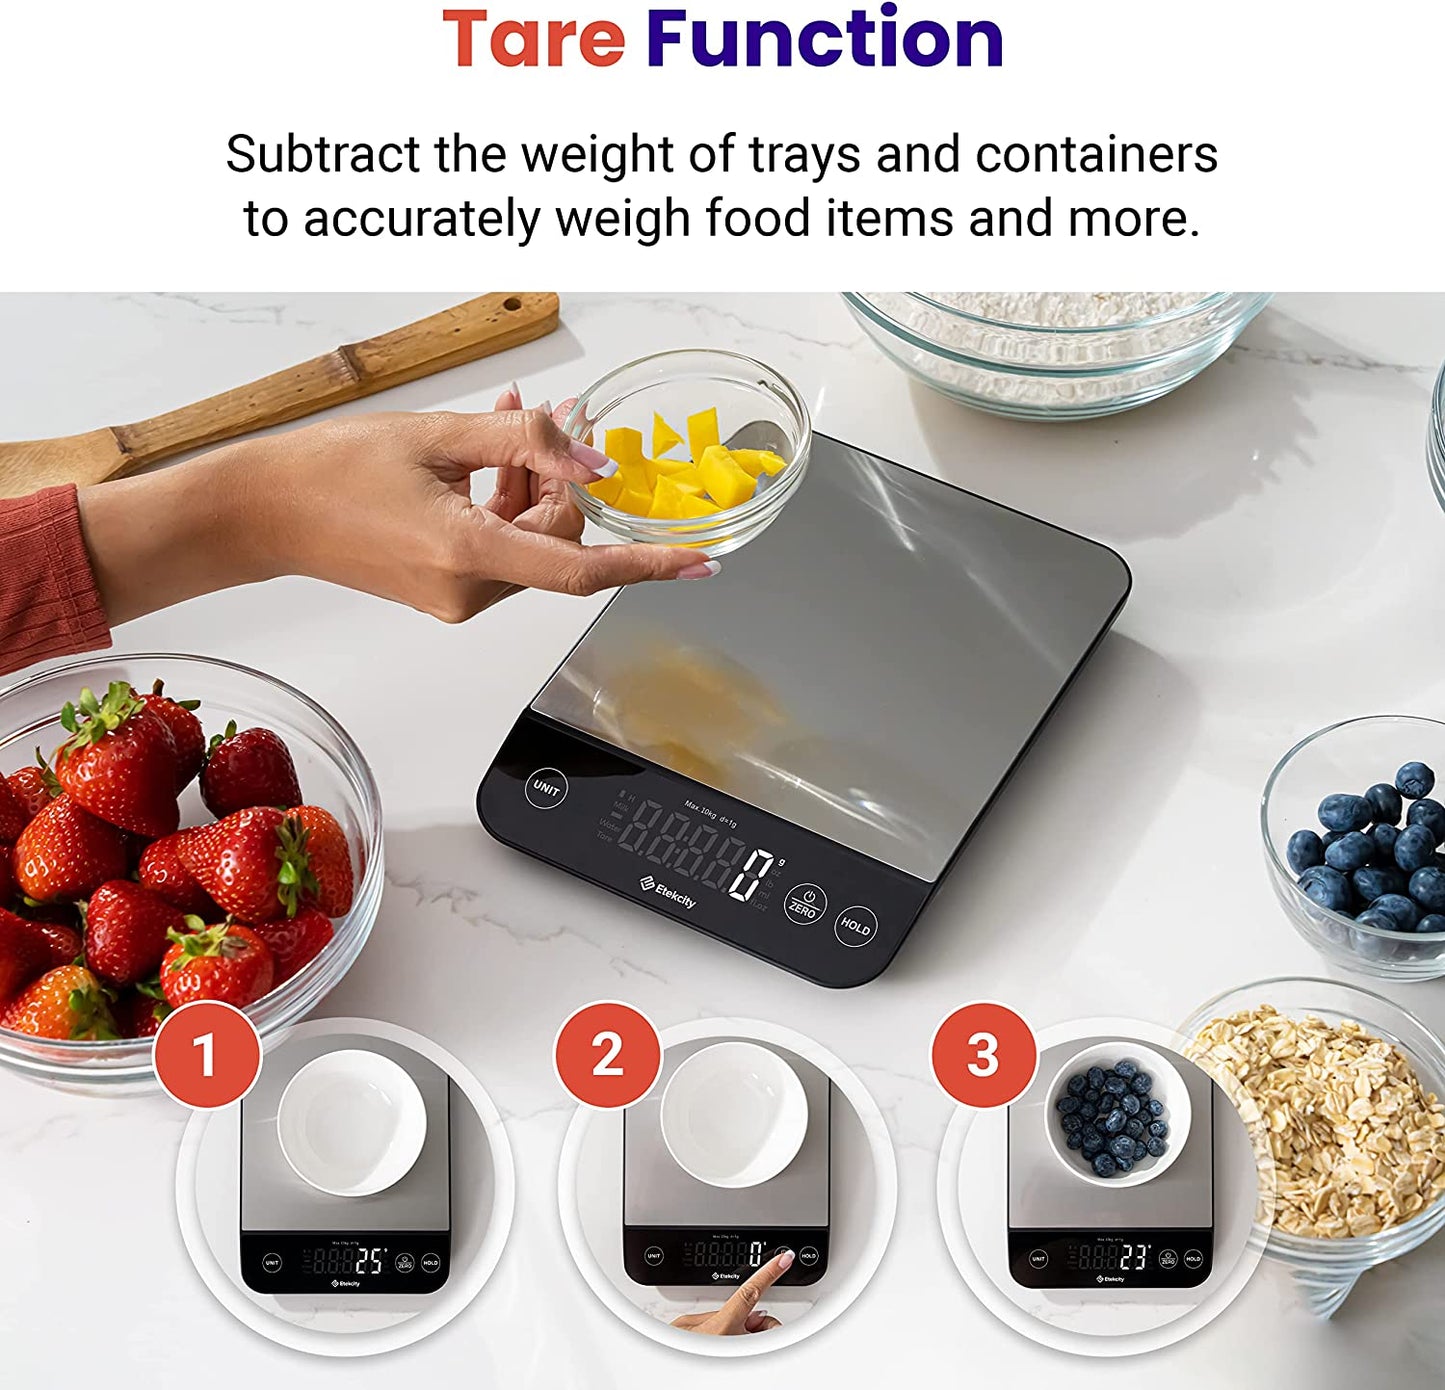 Food Kitchen Scale 22Lb, Digital Weight Grams and Oz for Weight Loss, Baking and Cooking, 0.05Oz/1G Precise Graduation,5 Weight Units, IPX6 Waterproof, USB Rechargeable,304 Stainless Steel